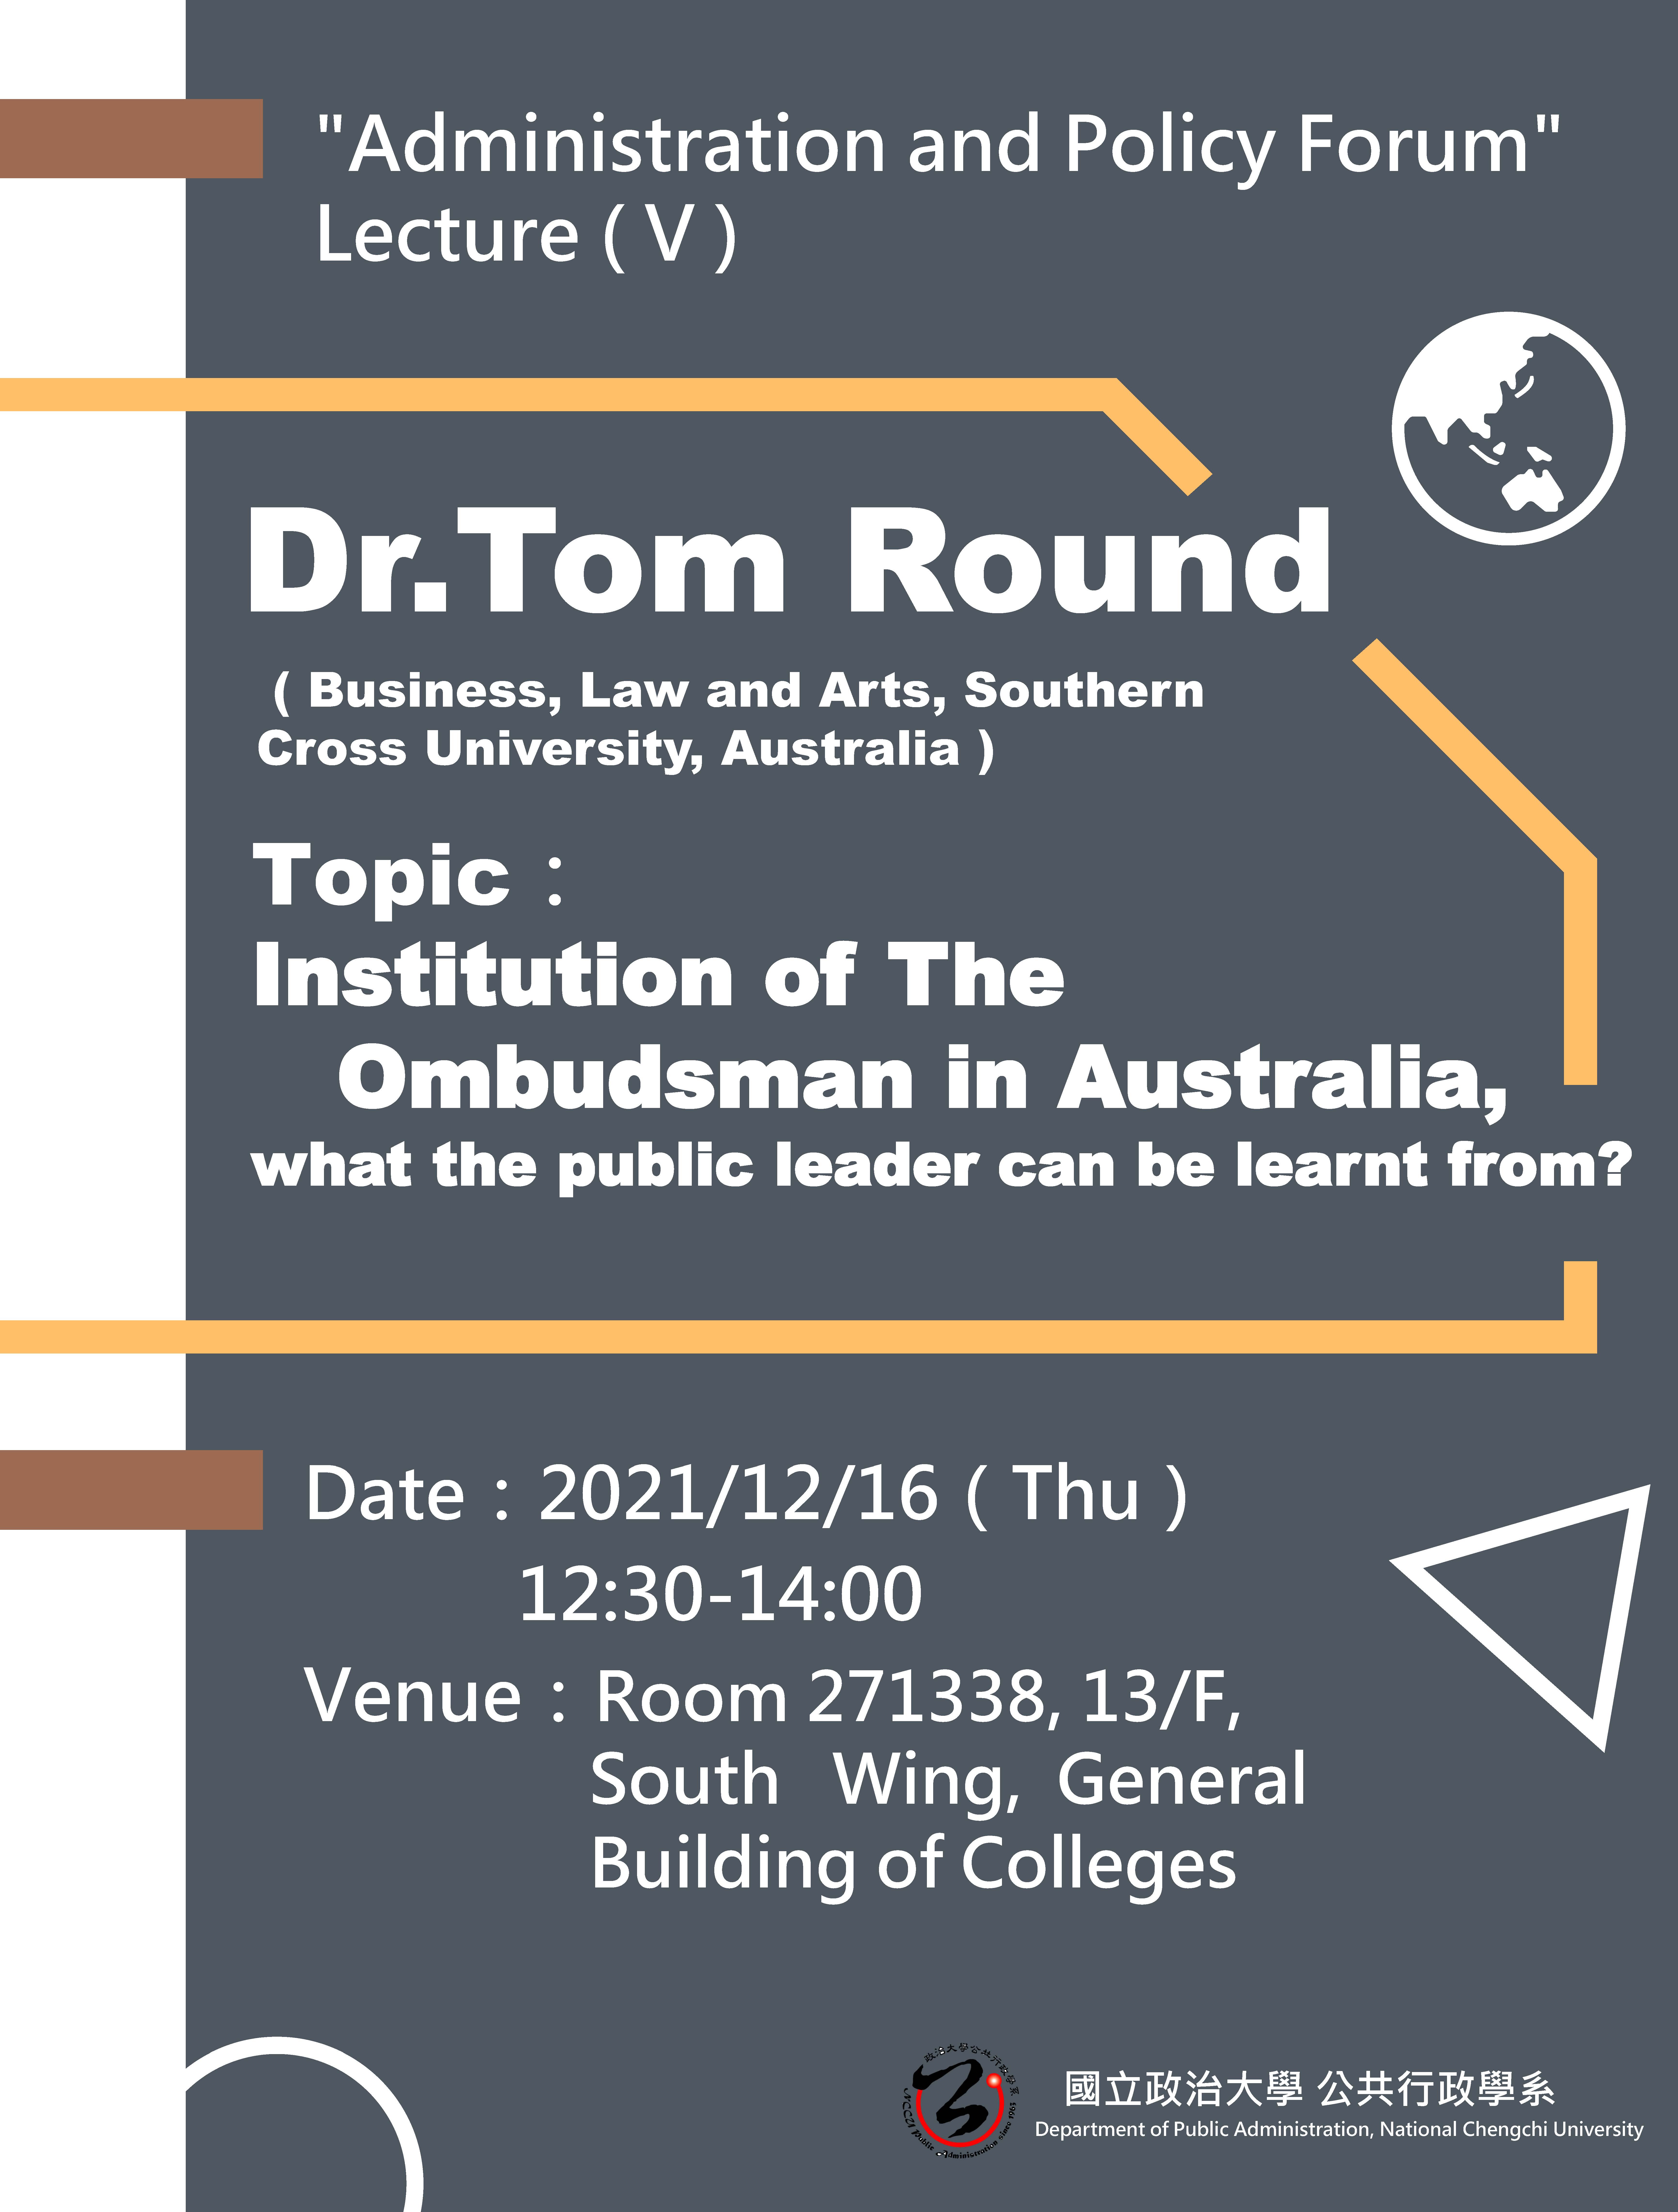  [Lecture] Institution of The Ombudsman in Australia, what the public leader can be learnt from?